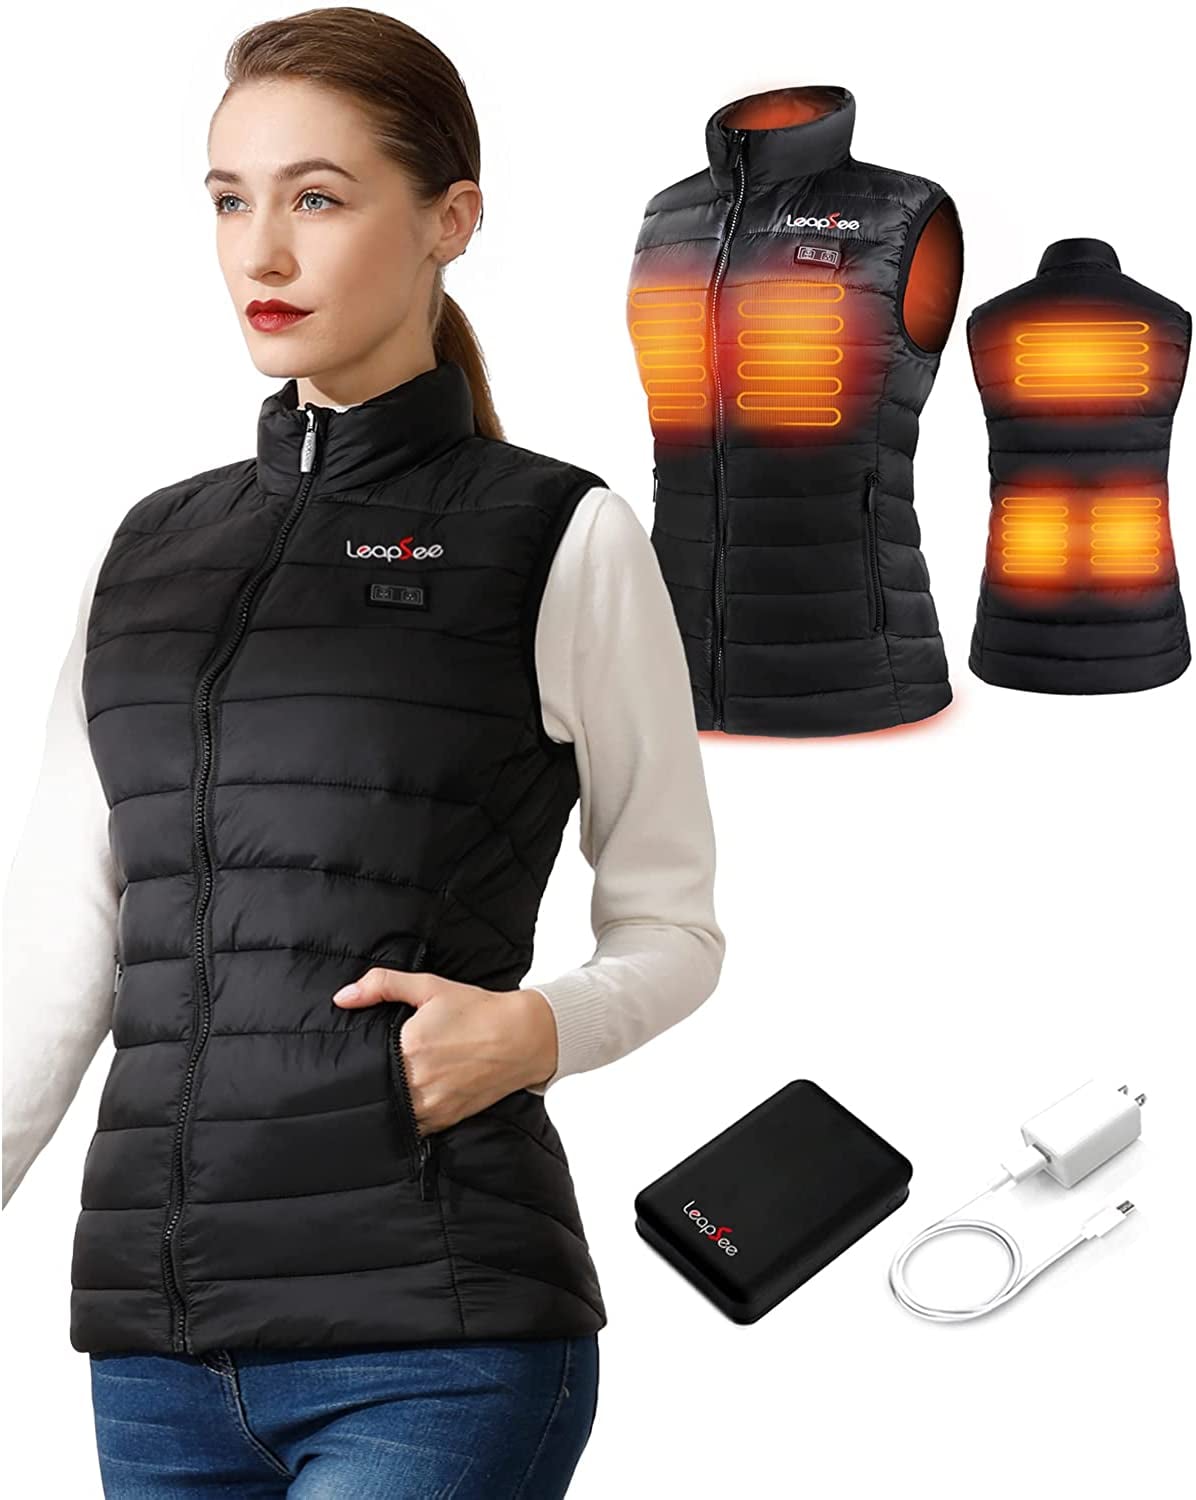 Heated Jackets on Sale For Black Friday 2021